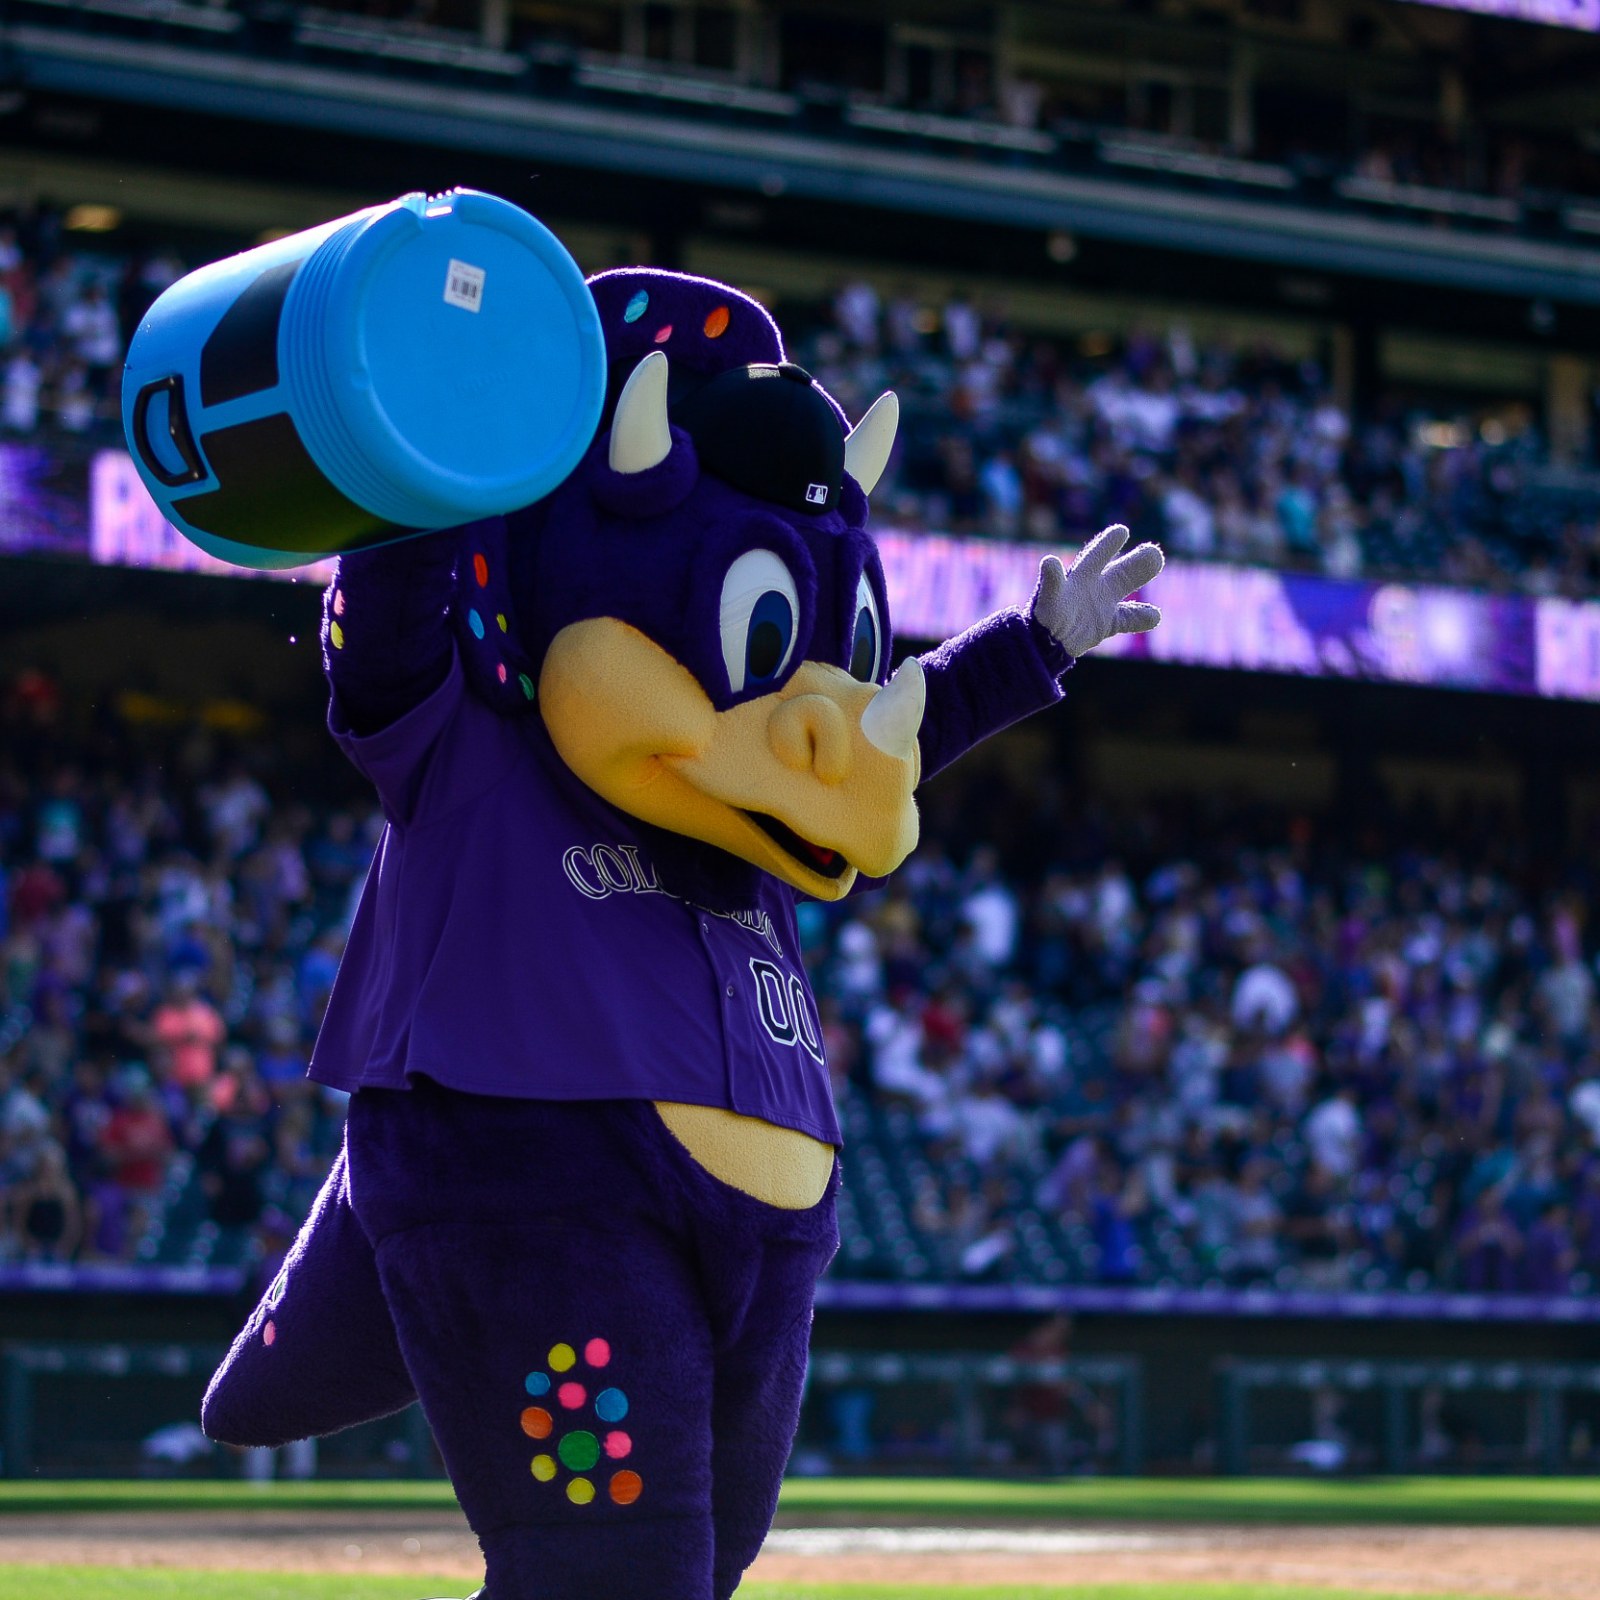 Dinger Mascot Theory Spreads Online Over Racial Slur Heard at